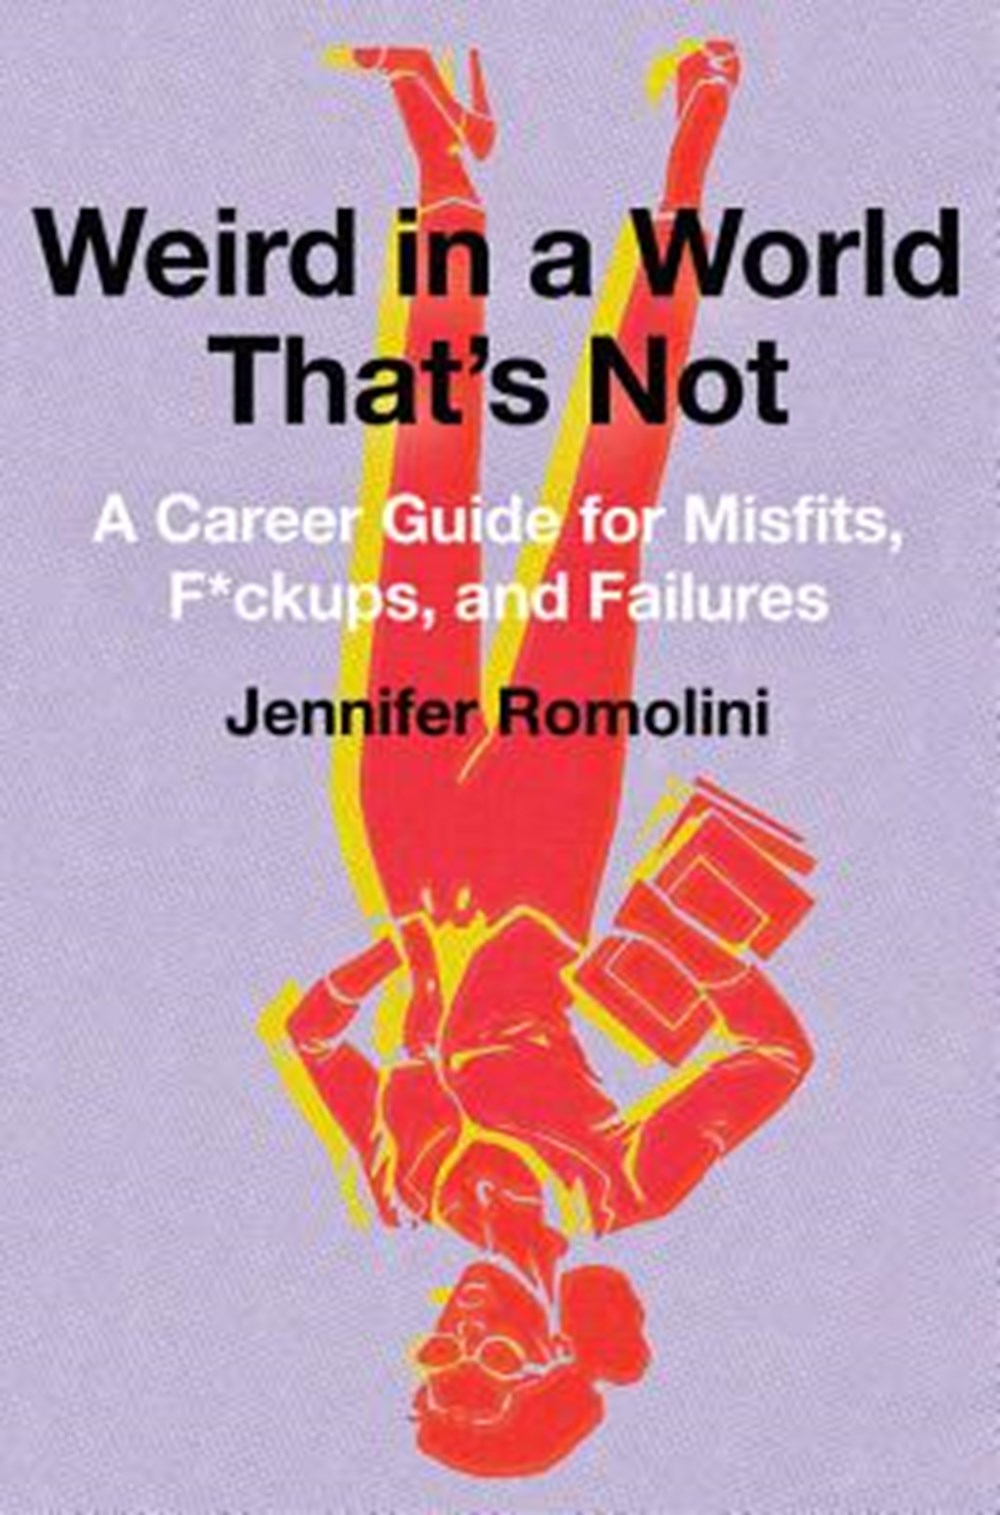 Weird in a World That's Not A Career Guide for Misfits, F*ckups, and Failures